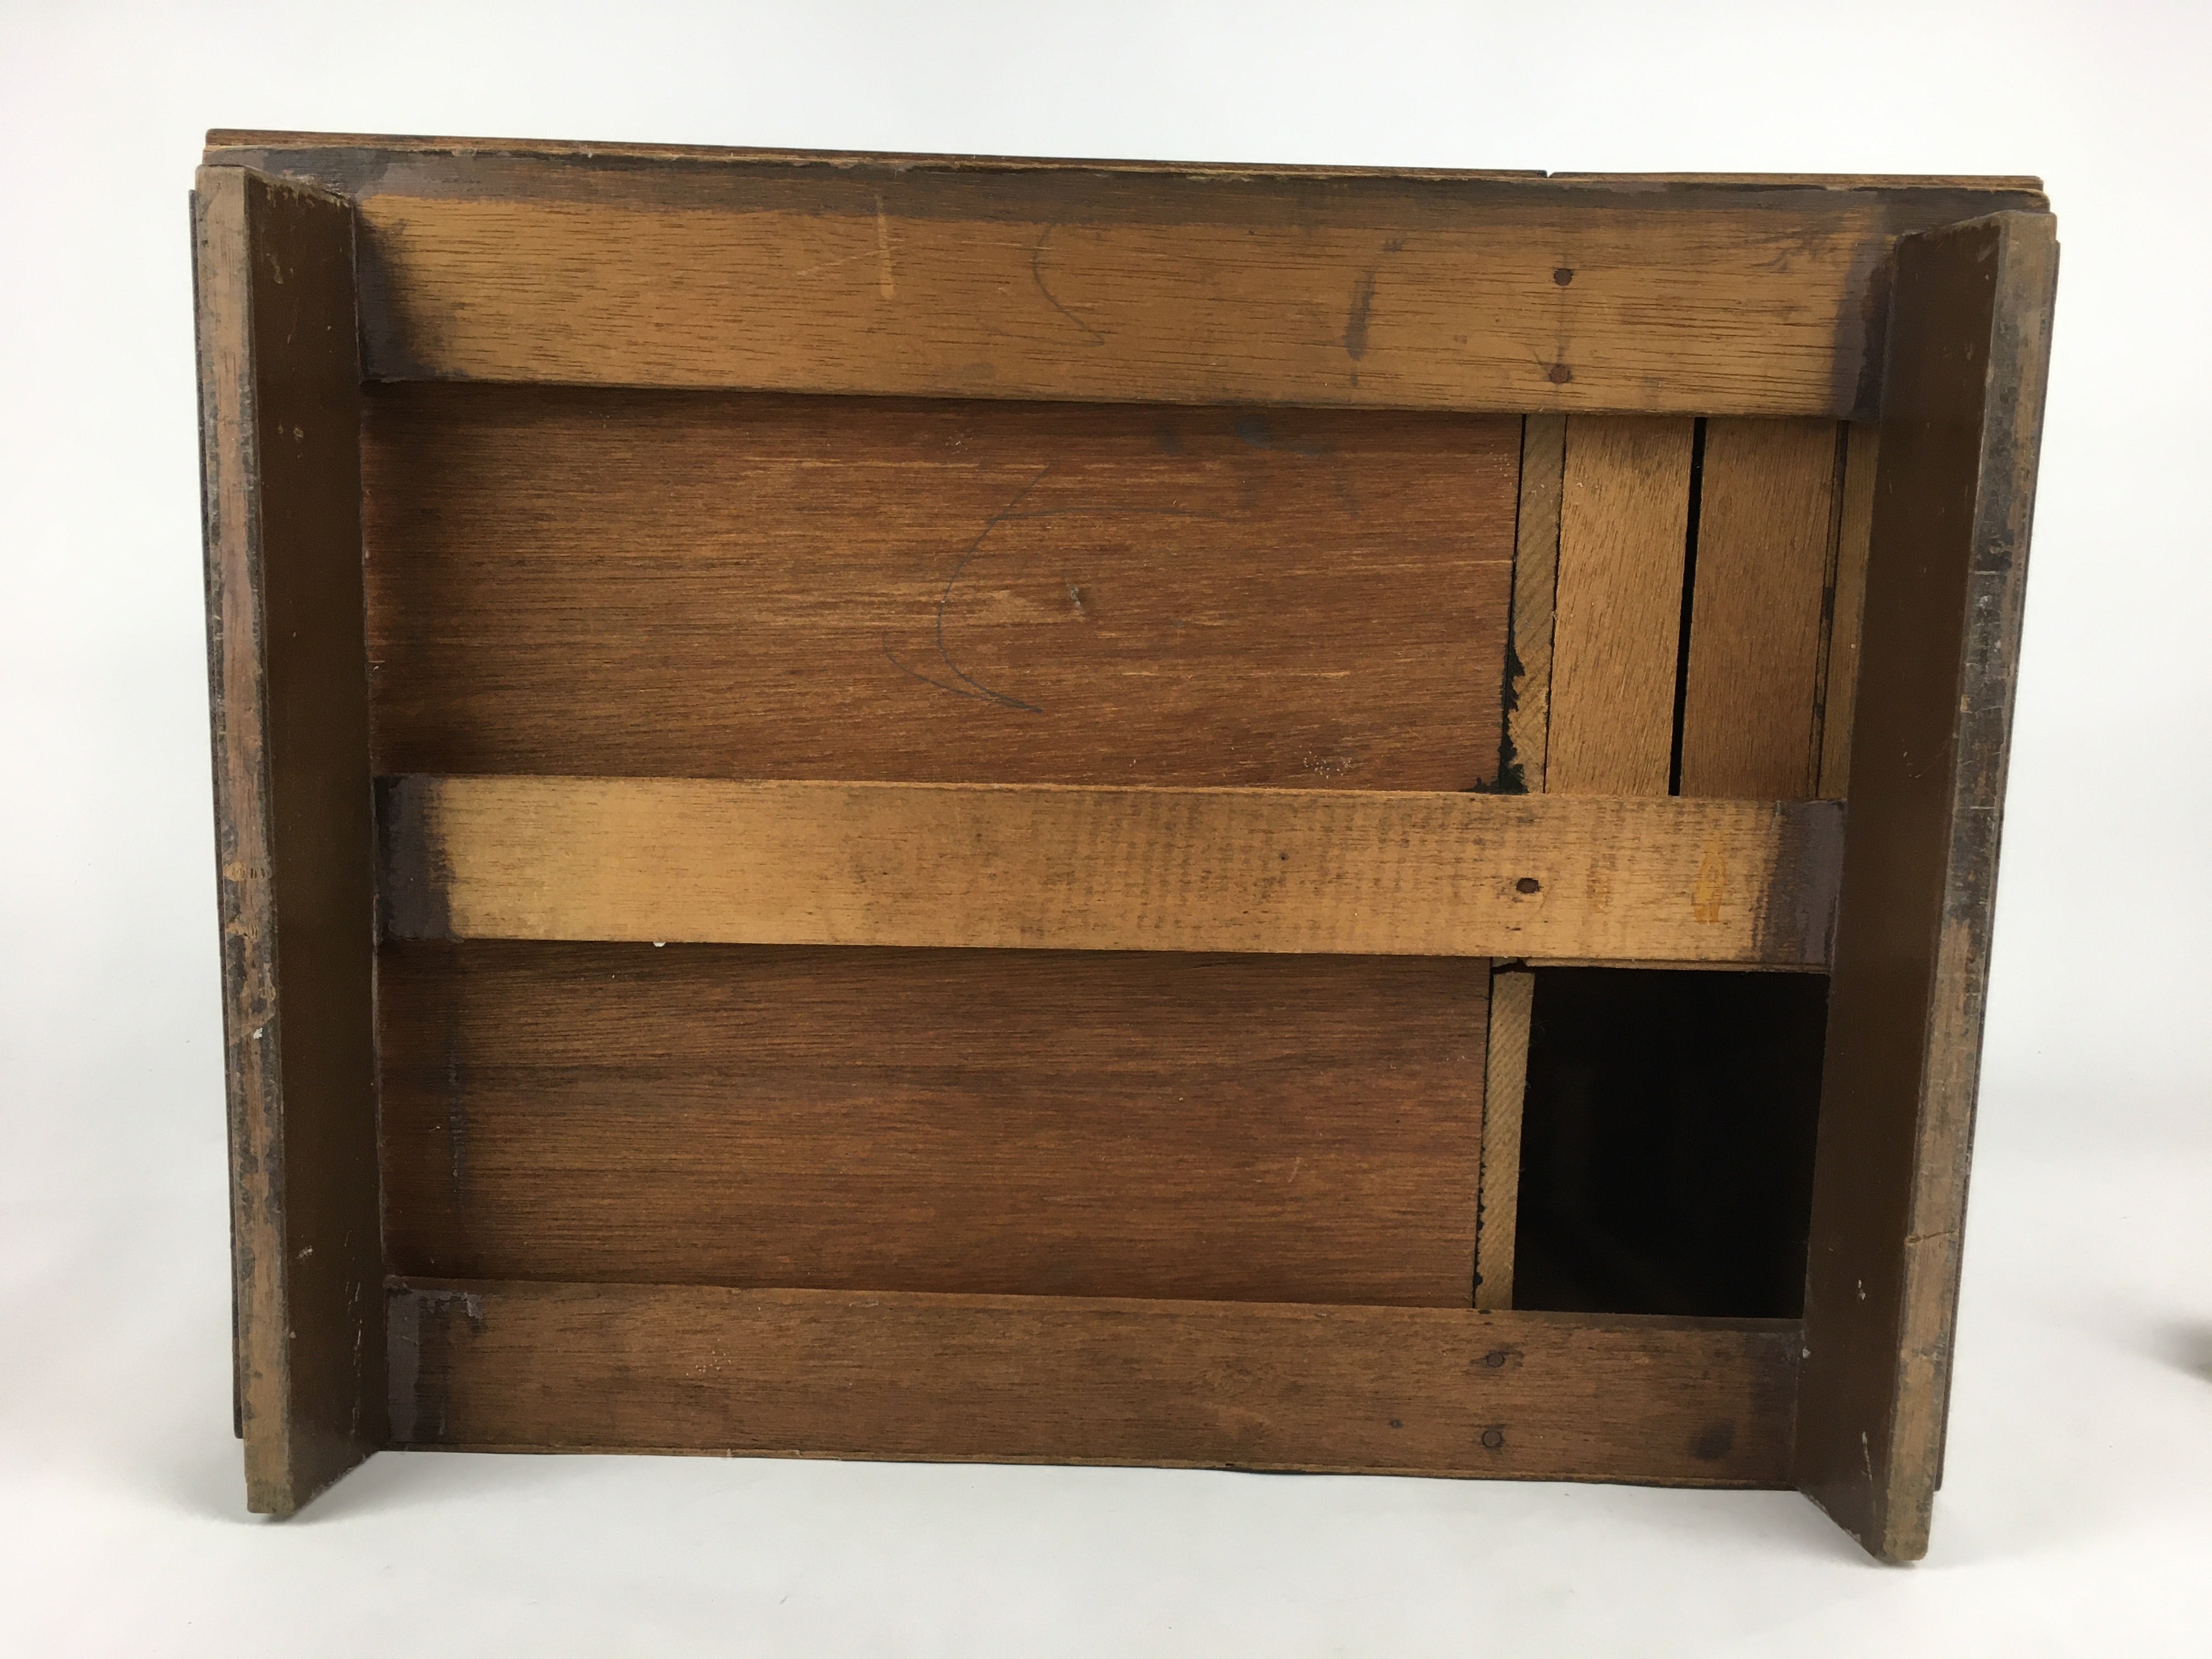 Japanese Wooden Chest Tansu Vtg 2 Panel Door Compartments Document T297